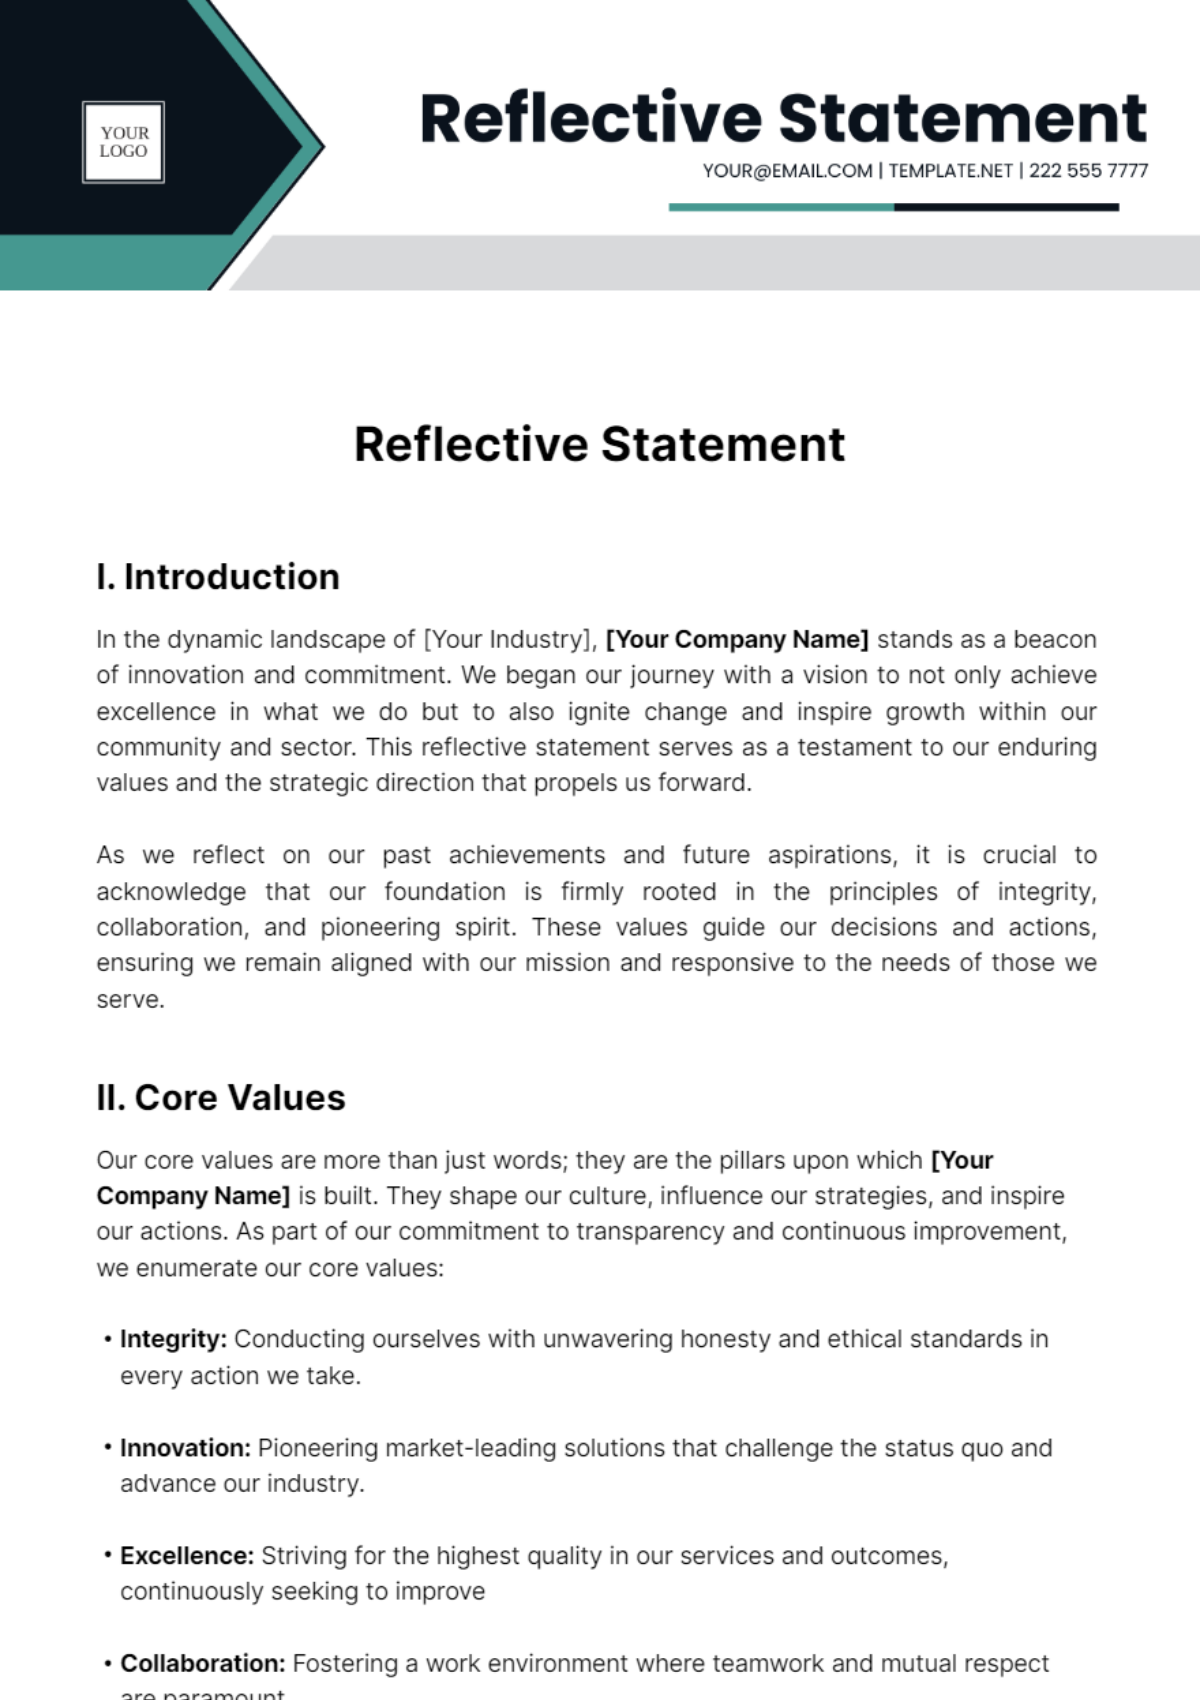 Reflective Statement Template